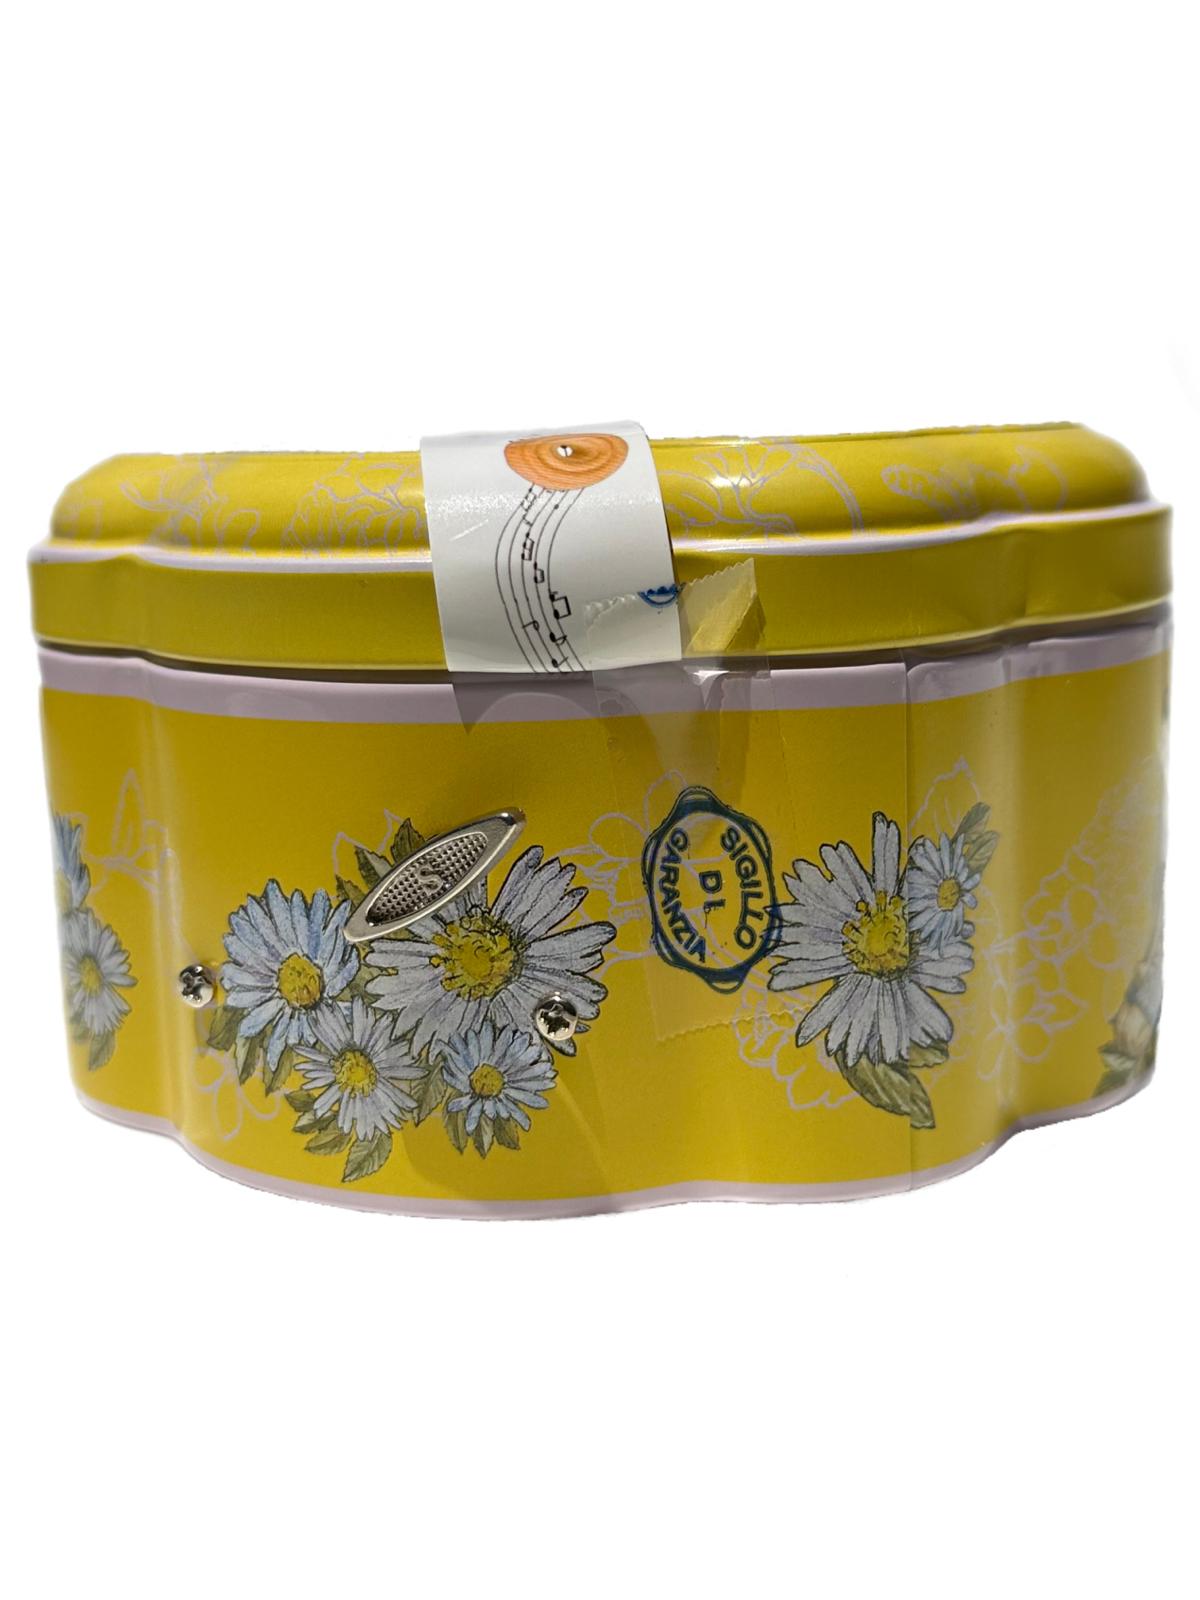 Marie Ange di Costa Italian Music Box Tin with Butter Biscuits—Scalloped in Lemon 140g